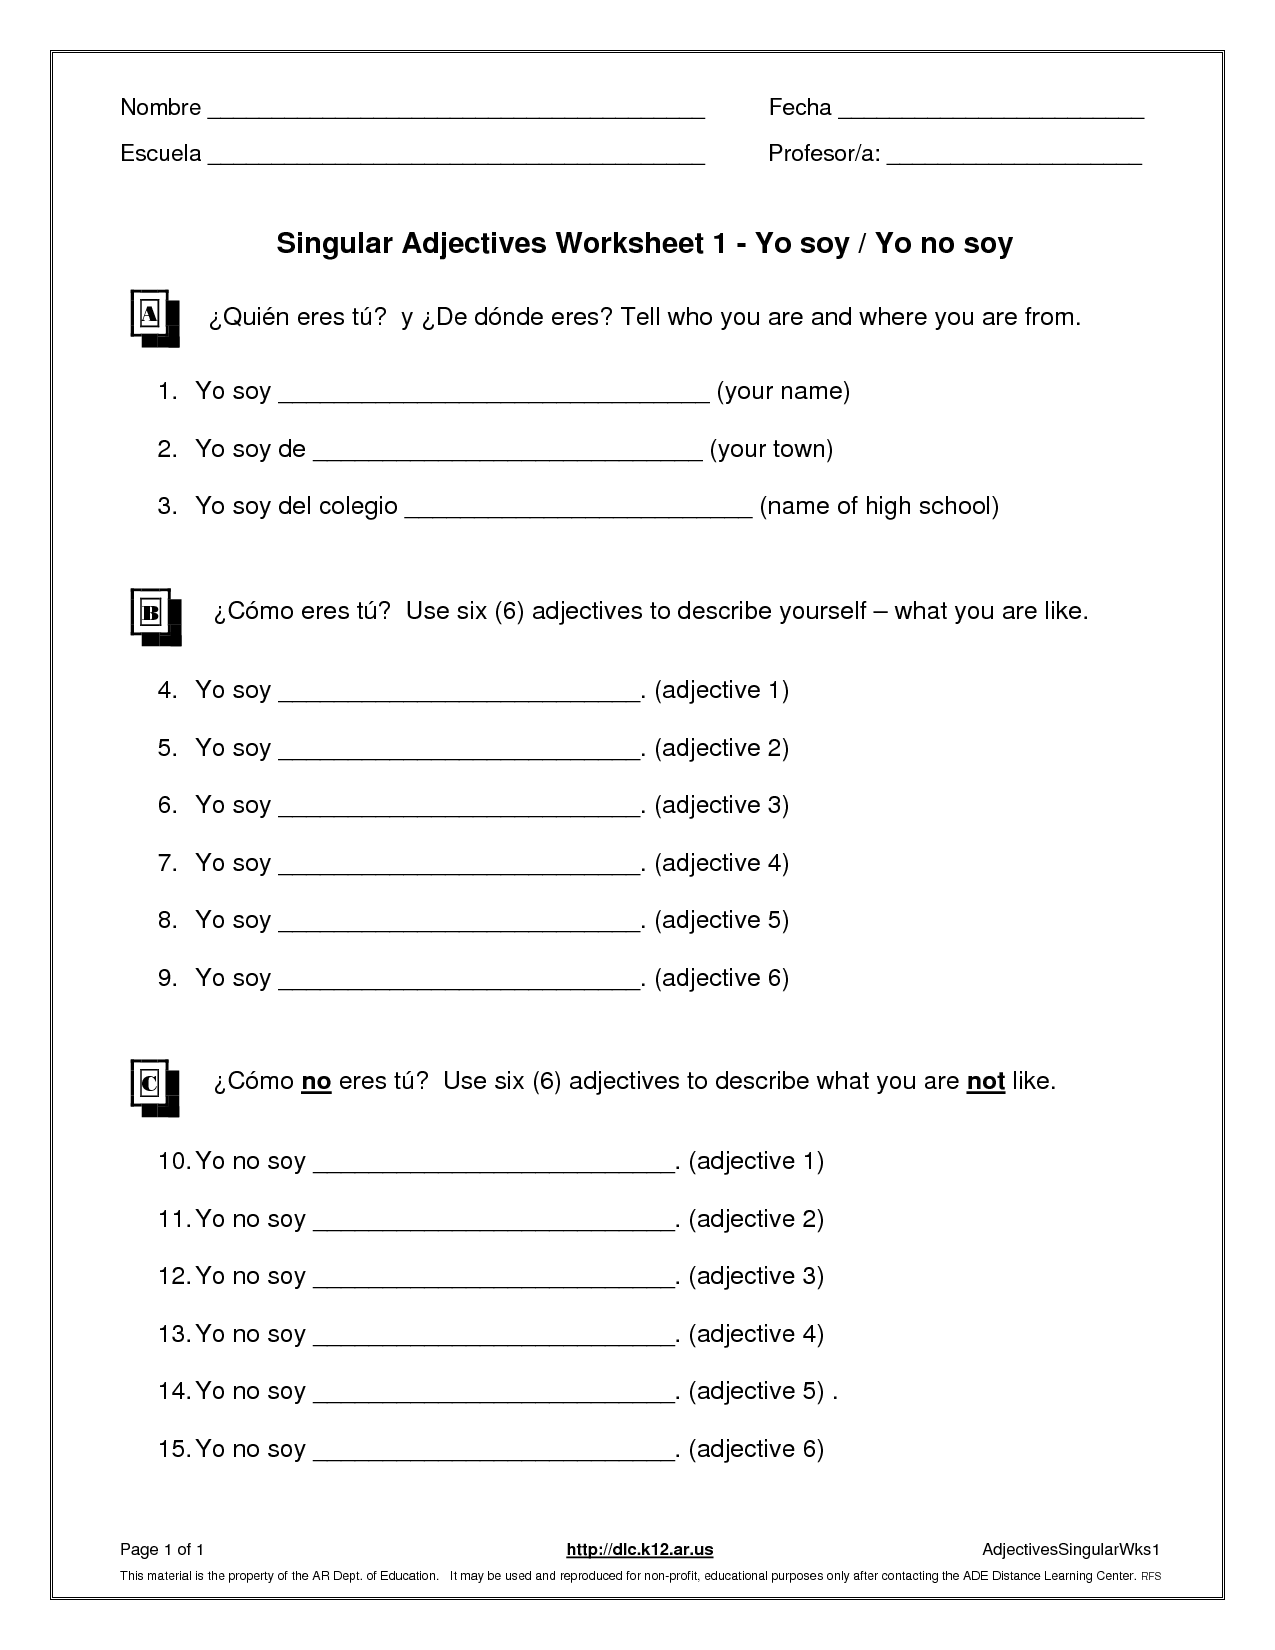 free-printable-anger-management-worksheets-for-youth